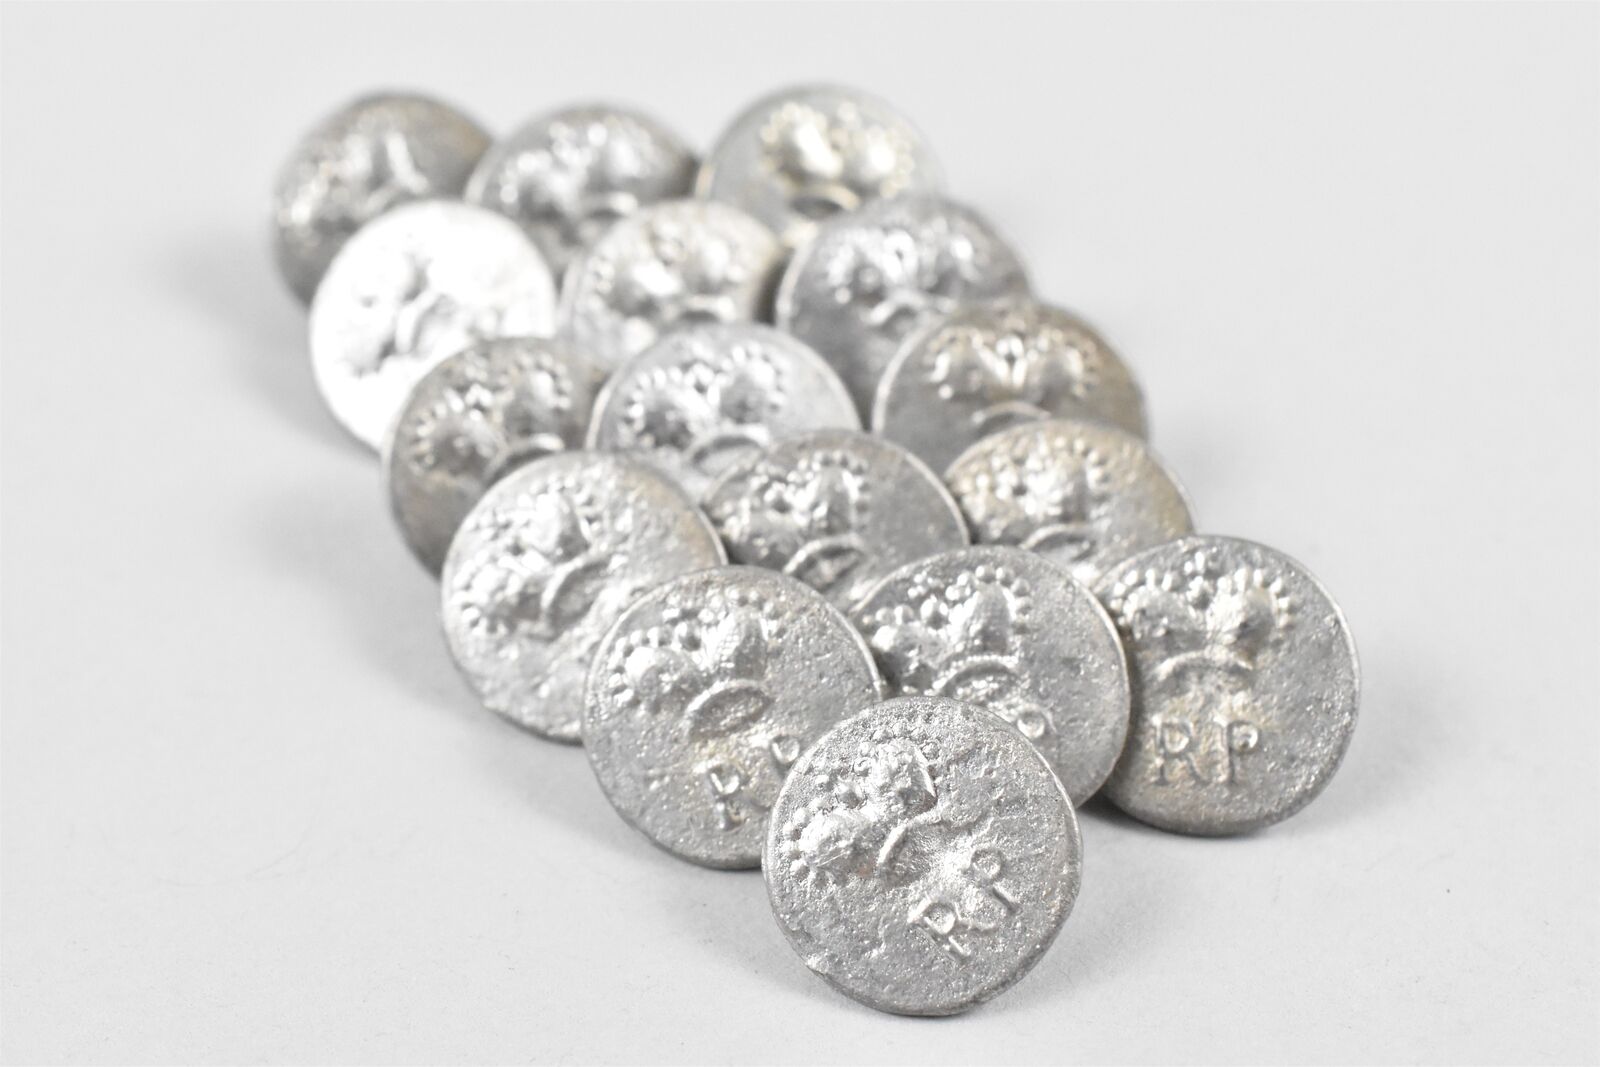 Sixteen (16) 15mm Royal Provincial Volunteer Enlisted Man's Buttons